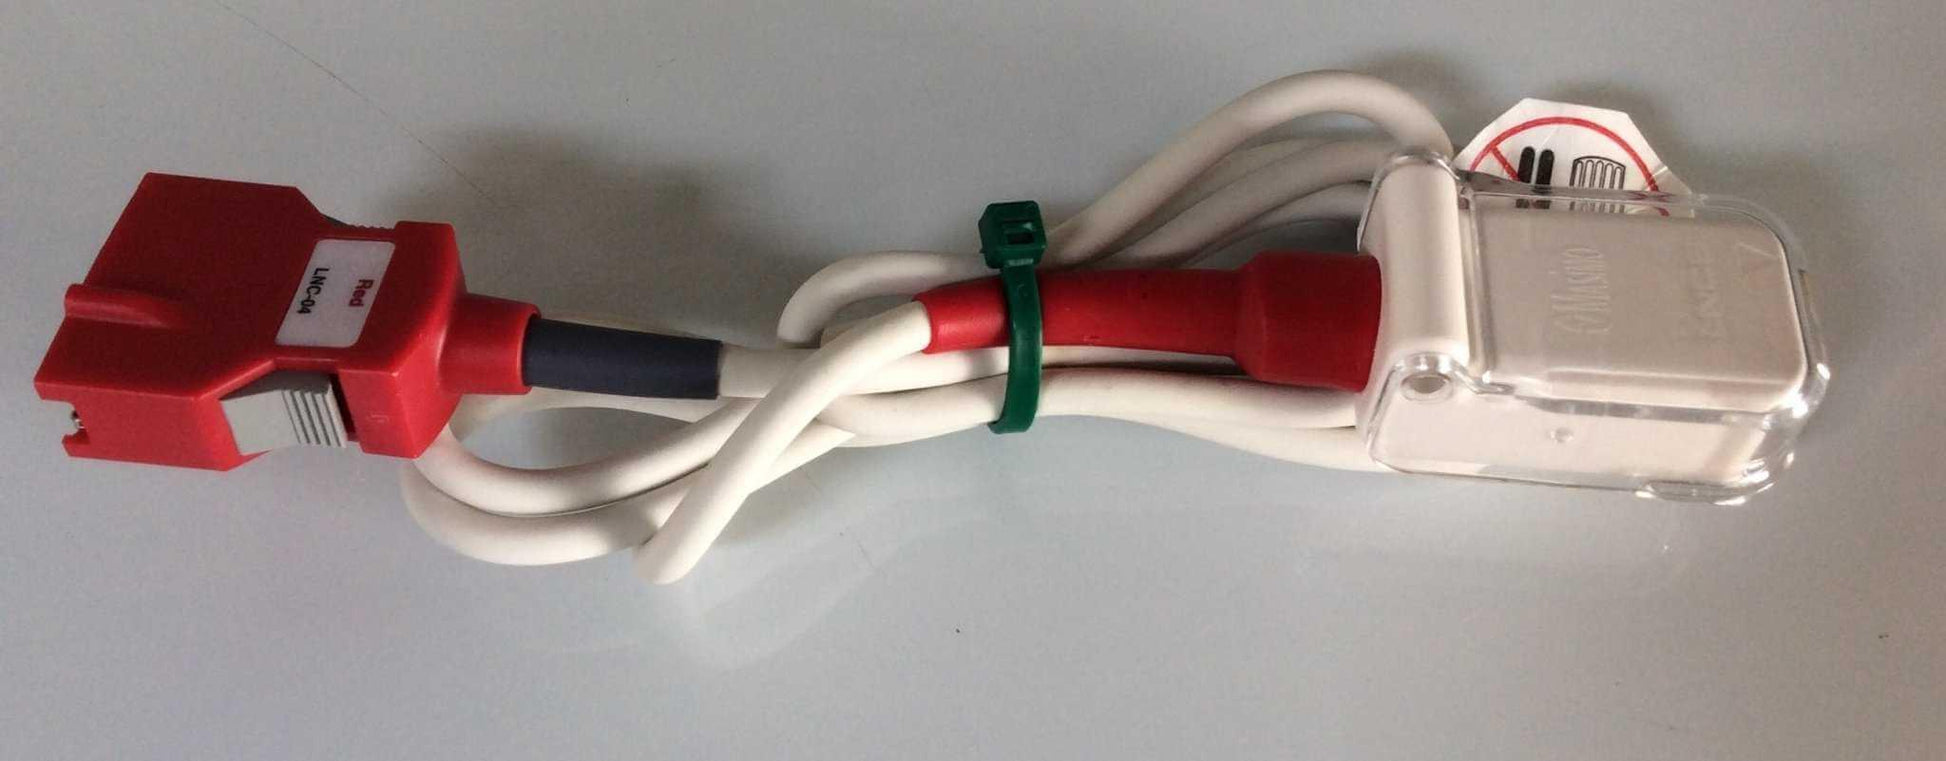 USED Masimo LNC-04 Patient Cable 4' FT 20 Pin 2055 Warranty FREE Shipping - MBR Medicals